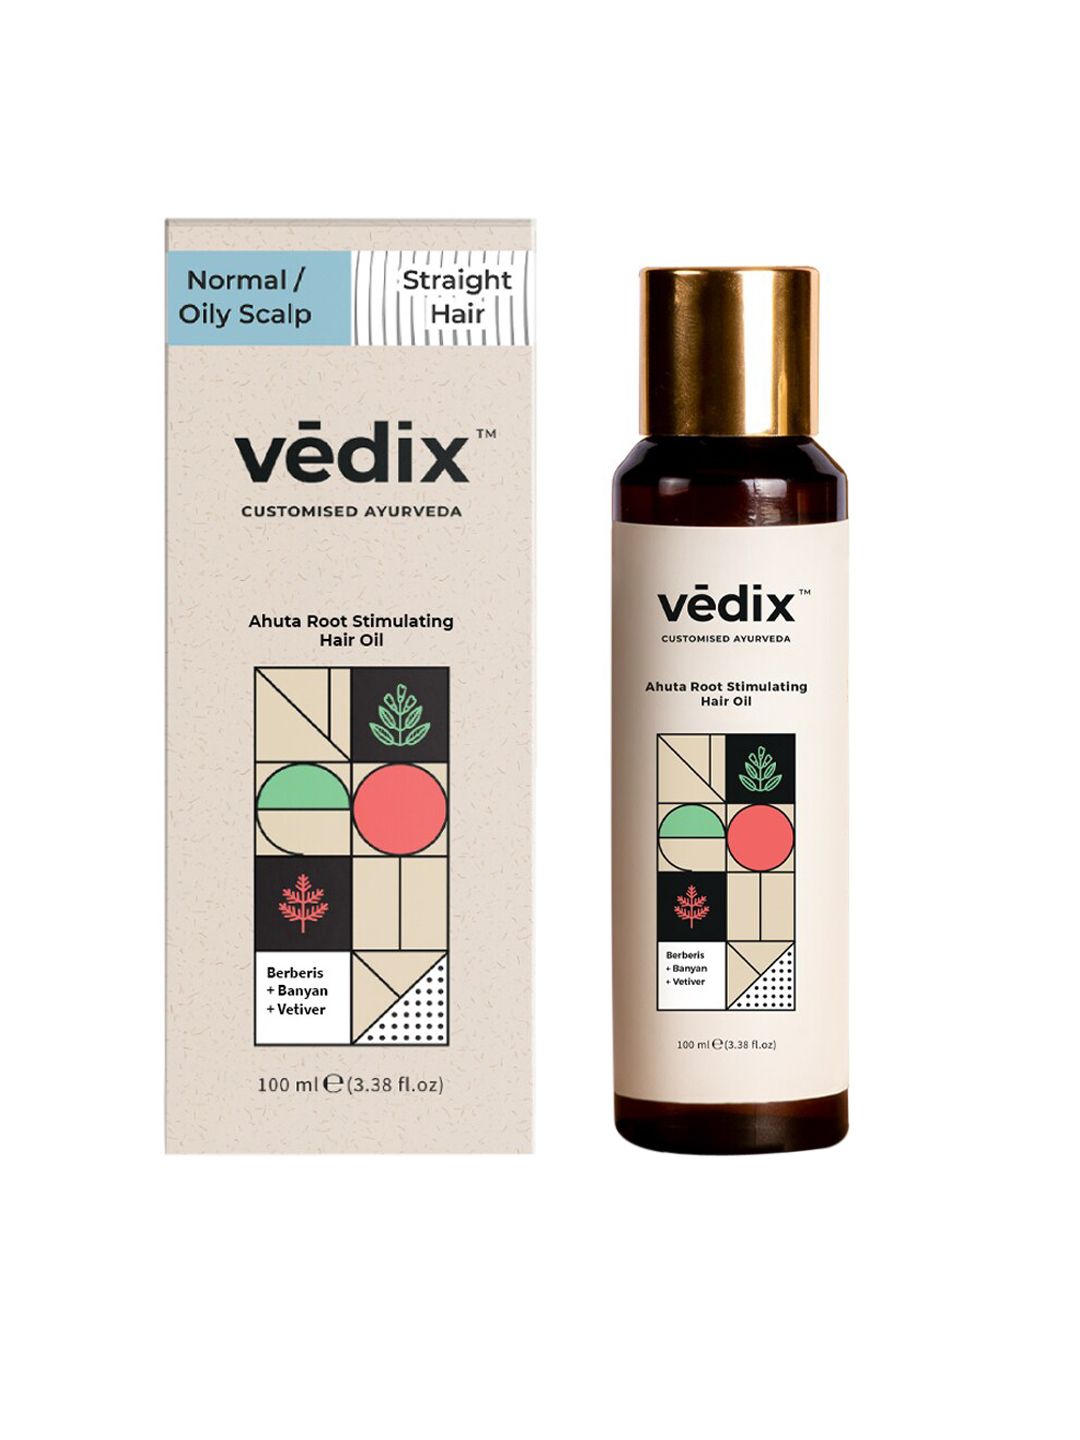 VEDIX Customized Ayurvedic Ahuta Root Stimulating Hair Oil for Normal & Oily Scalp - Straight Hair Price in India